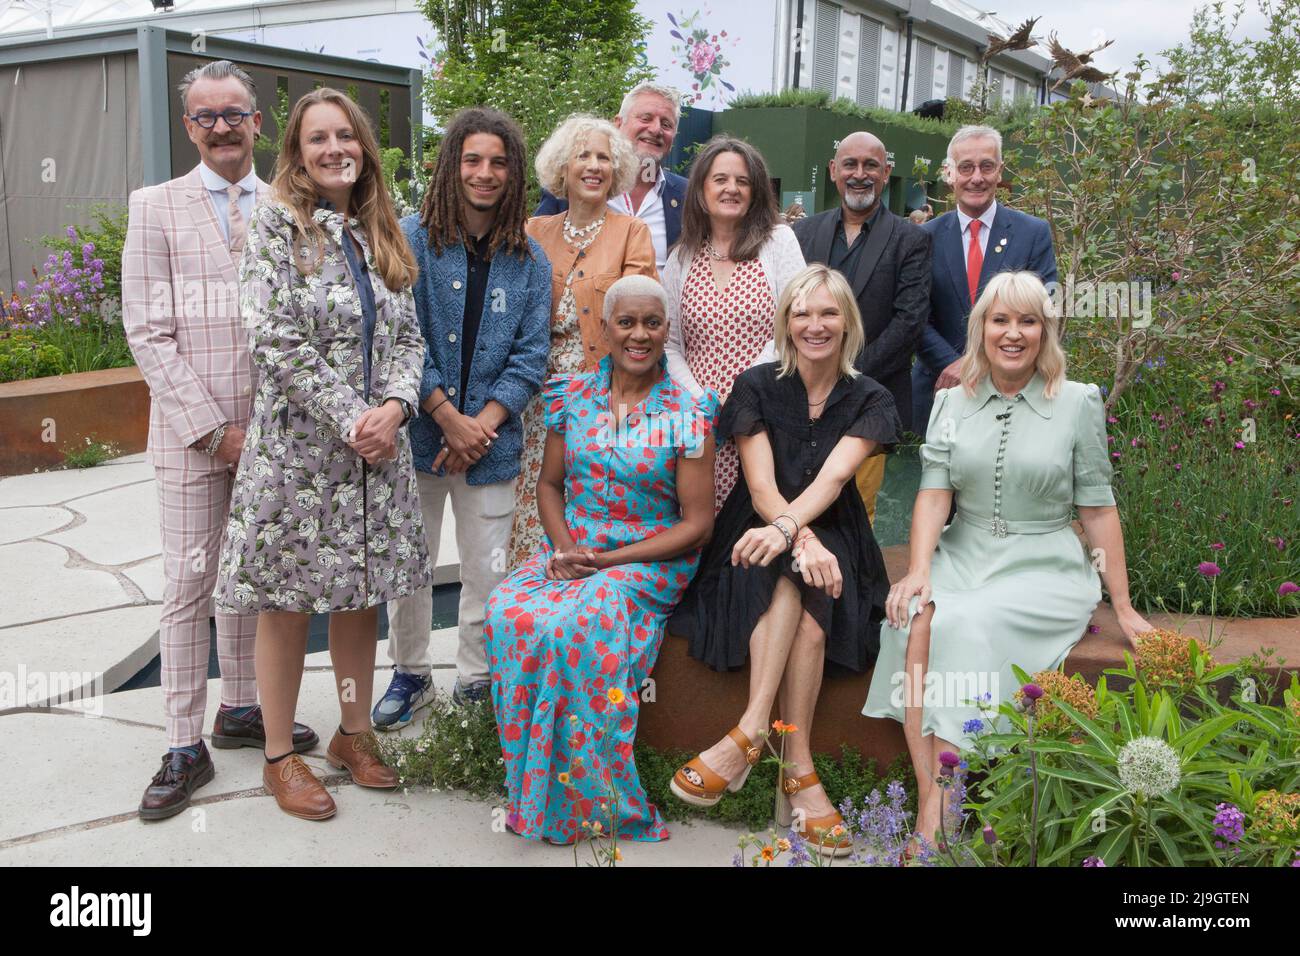 London, UK, 23 May 2022: Ten New RHS ambassadors are announced at Chelsea Flower Show, including Simon Lycett, Kate Bradbury, Tayshan Hayden Smith, Sue Kent, Mark Gregory, incoming RHS president Clare Matterson, Manoj Malde, James Alexander-Sinclair and seated Arit Anderson,  Jo Wiley and Nicki Chapman.  Anna Watson/Alamy Live News Stock Photo